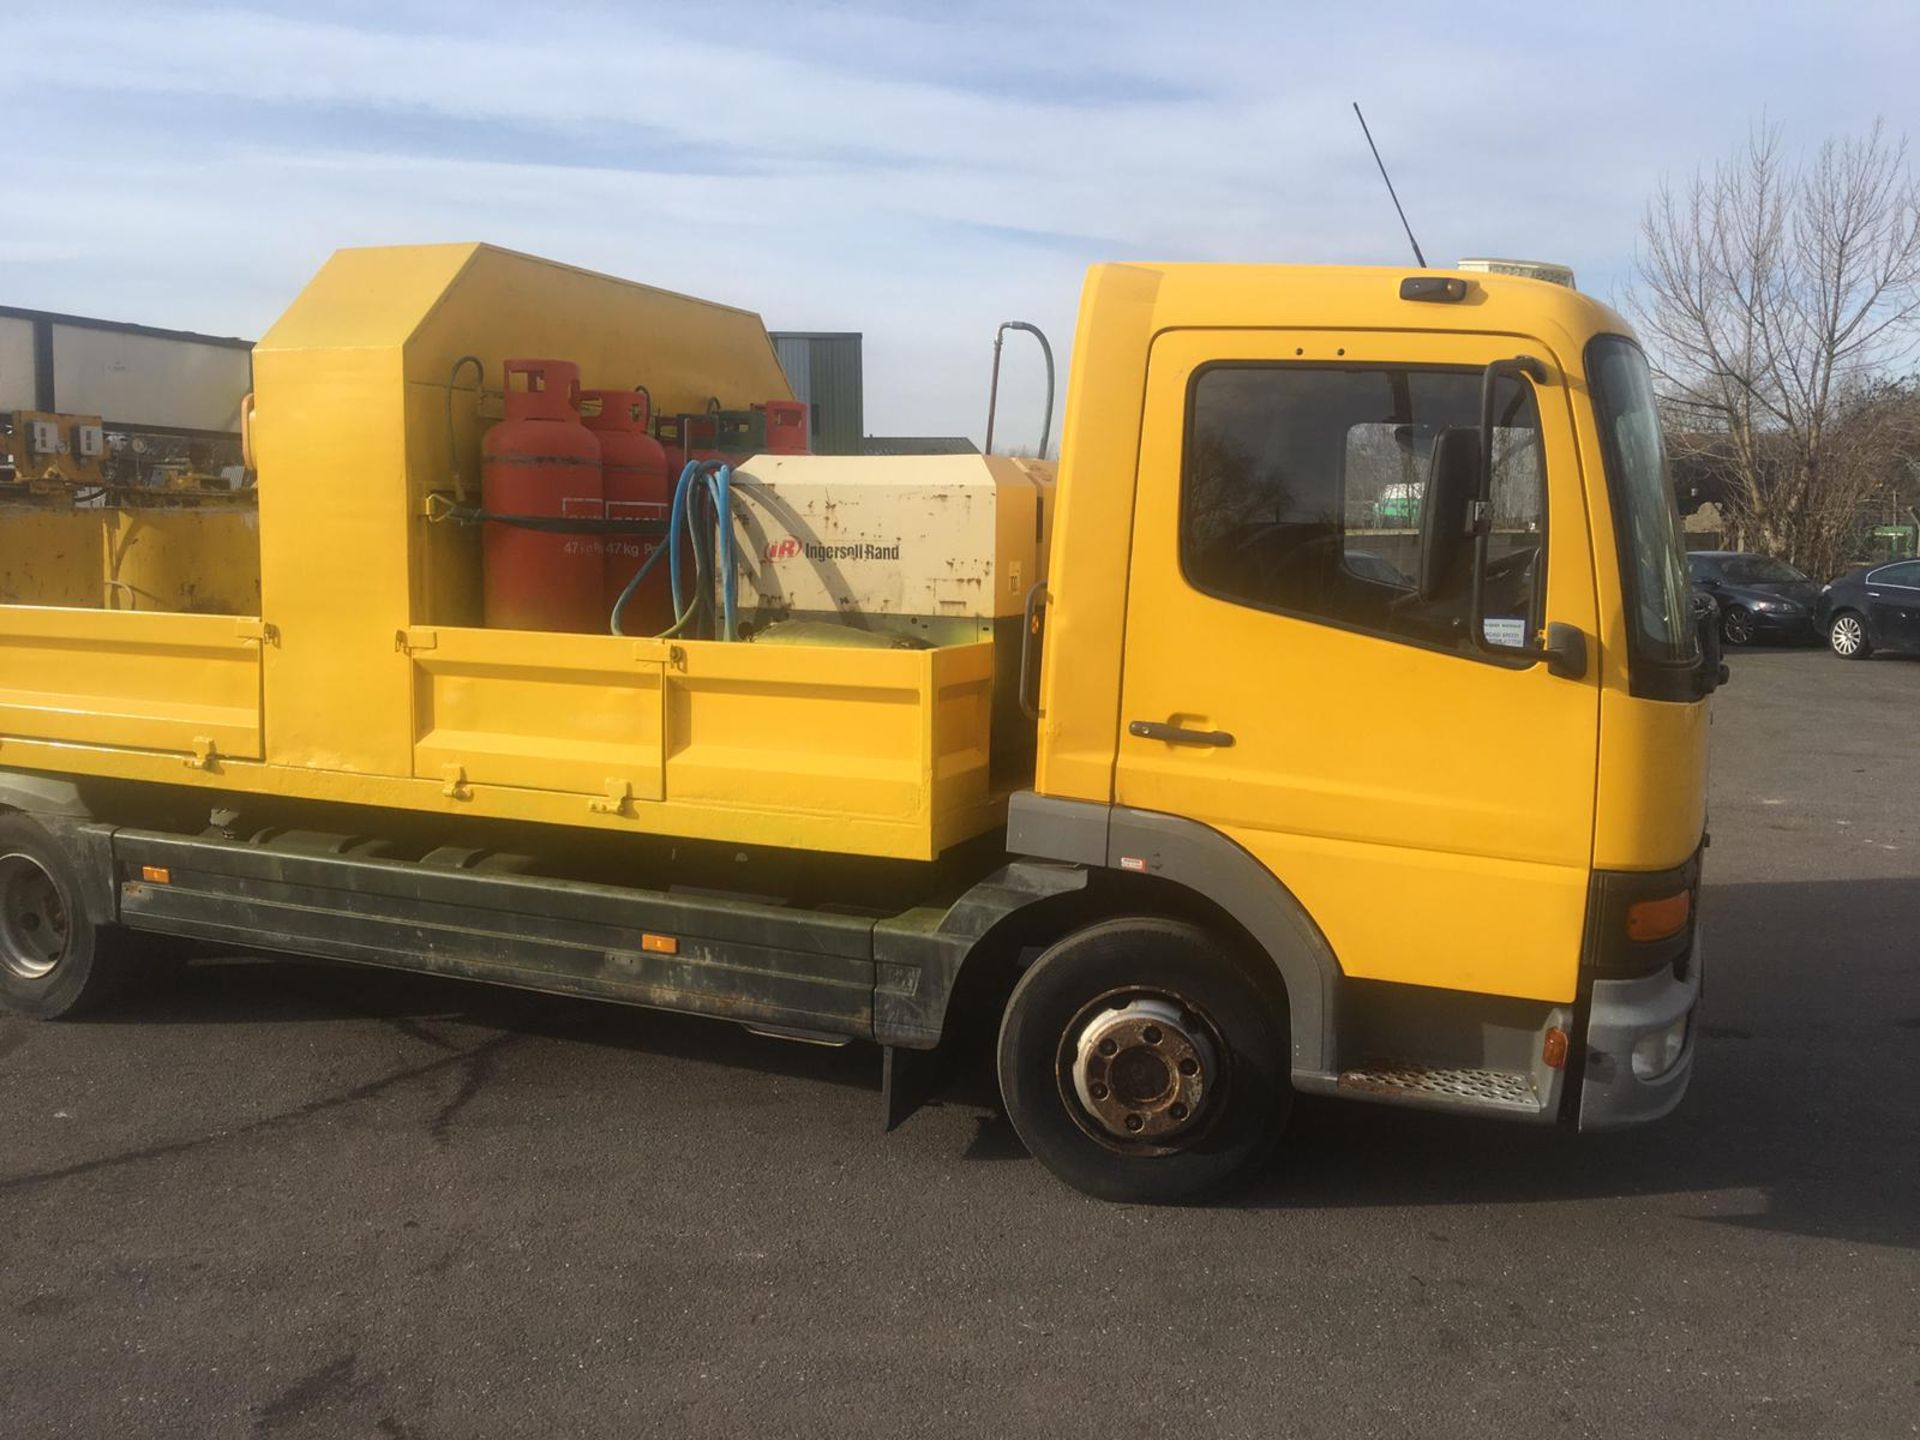 2004/54 REG MERCEDES ATEGO 1018 DAY YELLOW DROPSIDE LINE PAINTING LORRY 4.3L DIESEL ENGINE *NO VAT* - Image 3 of 64